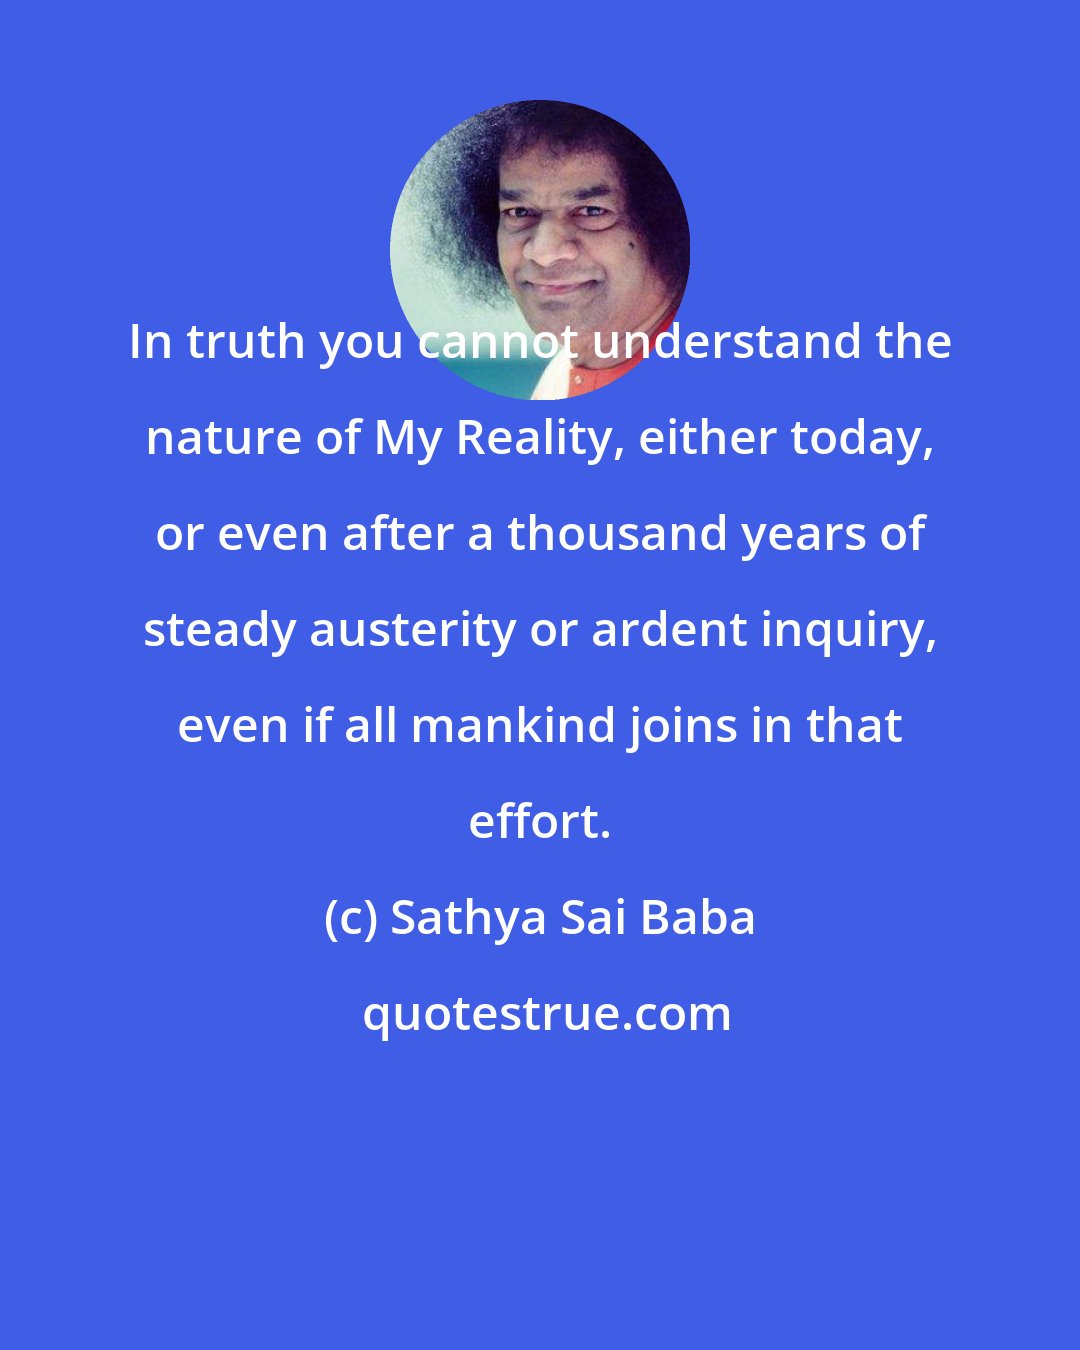 Sathya Sai Baba: In truth you cannot understand the nature of My Reality, either today, or even after a thousand years of steady austerity or ardent inquiry, even if all mankind joins in that effort.